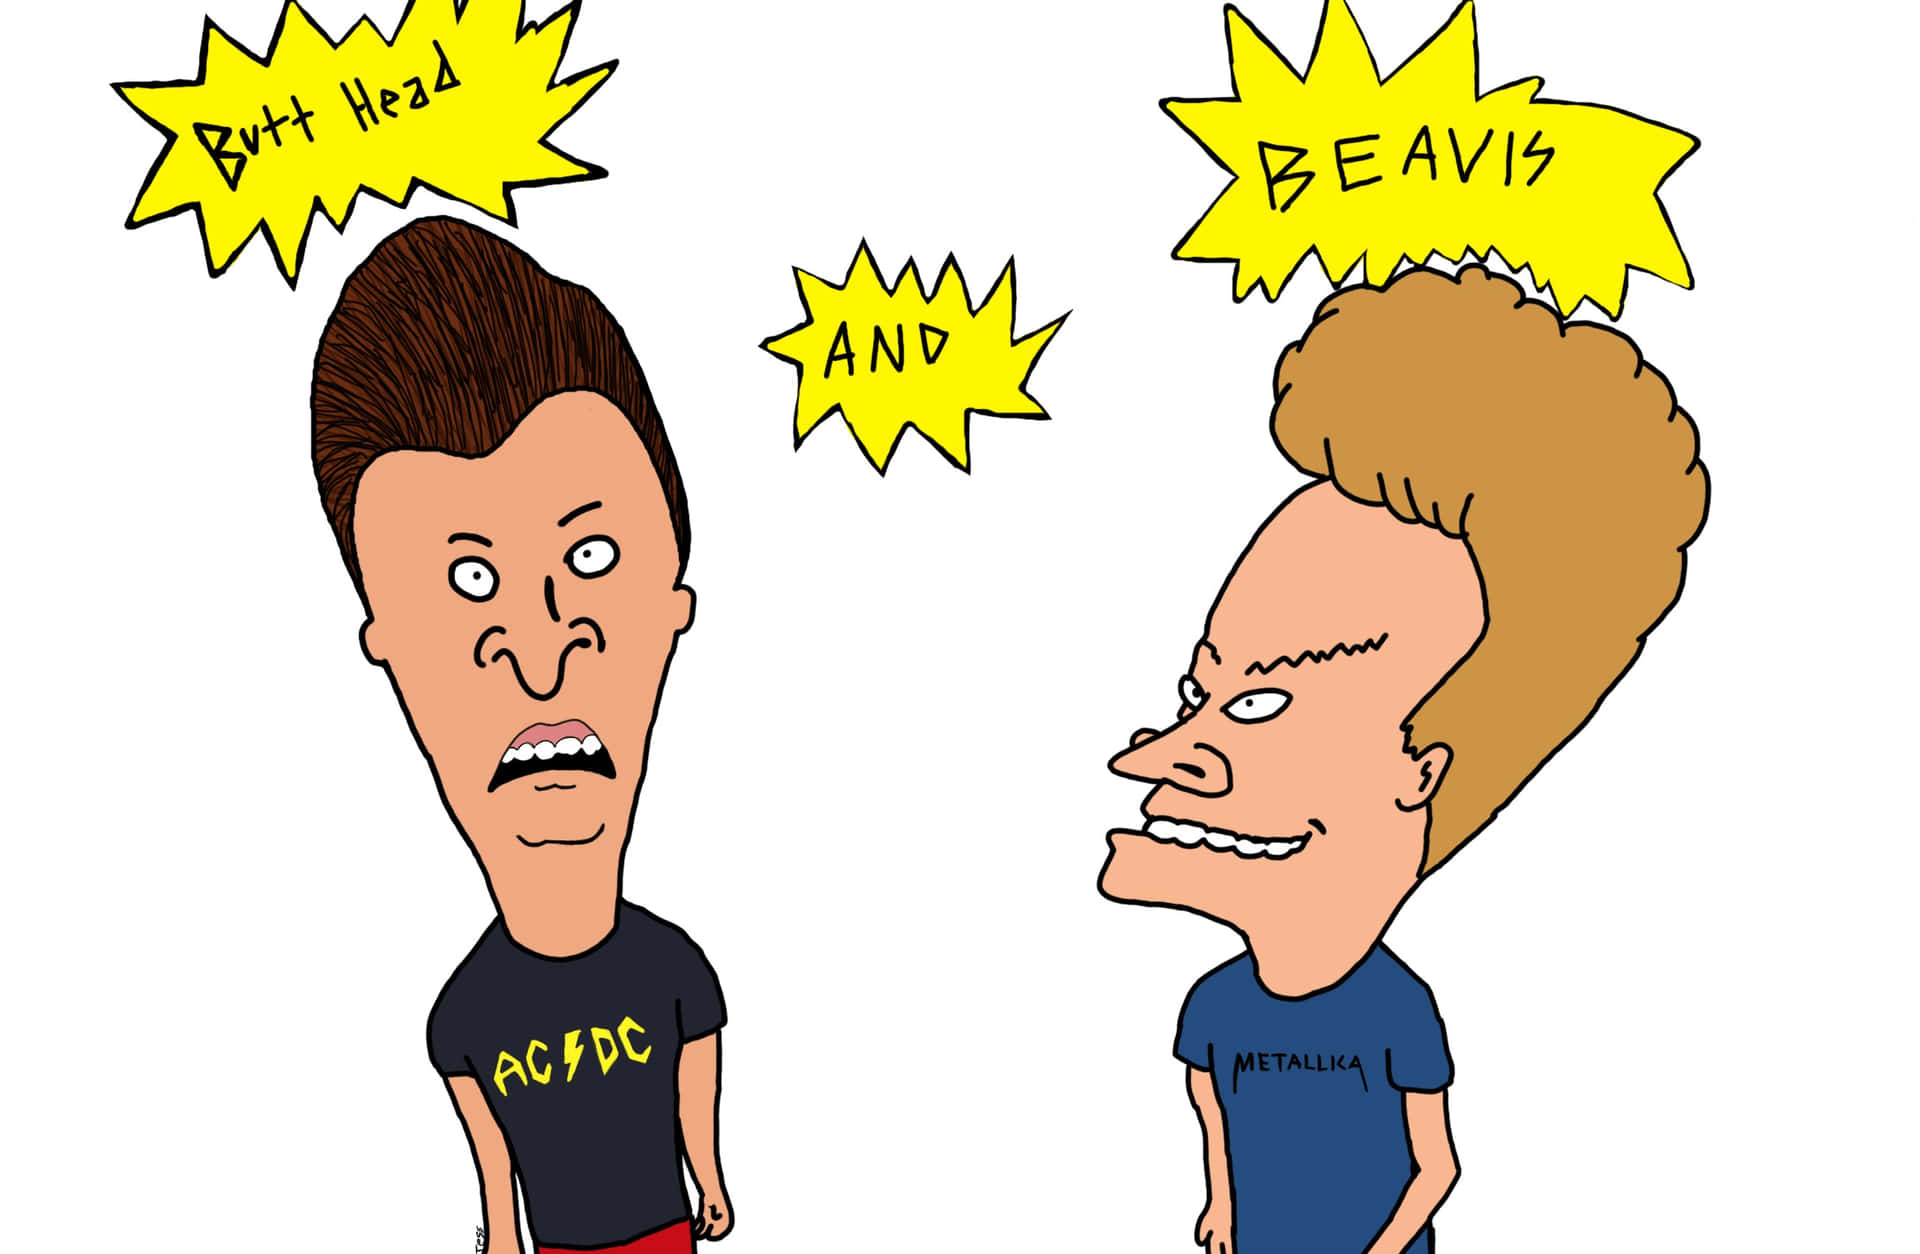 Beavis and Butthead take a break in their quest for mischief